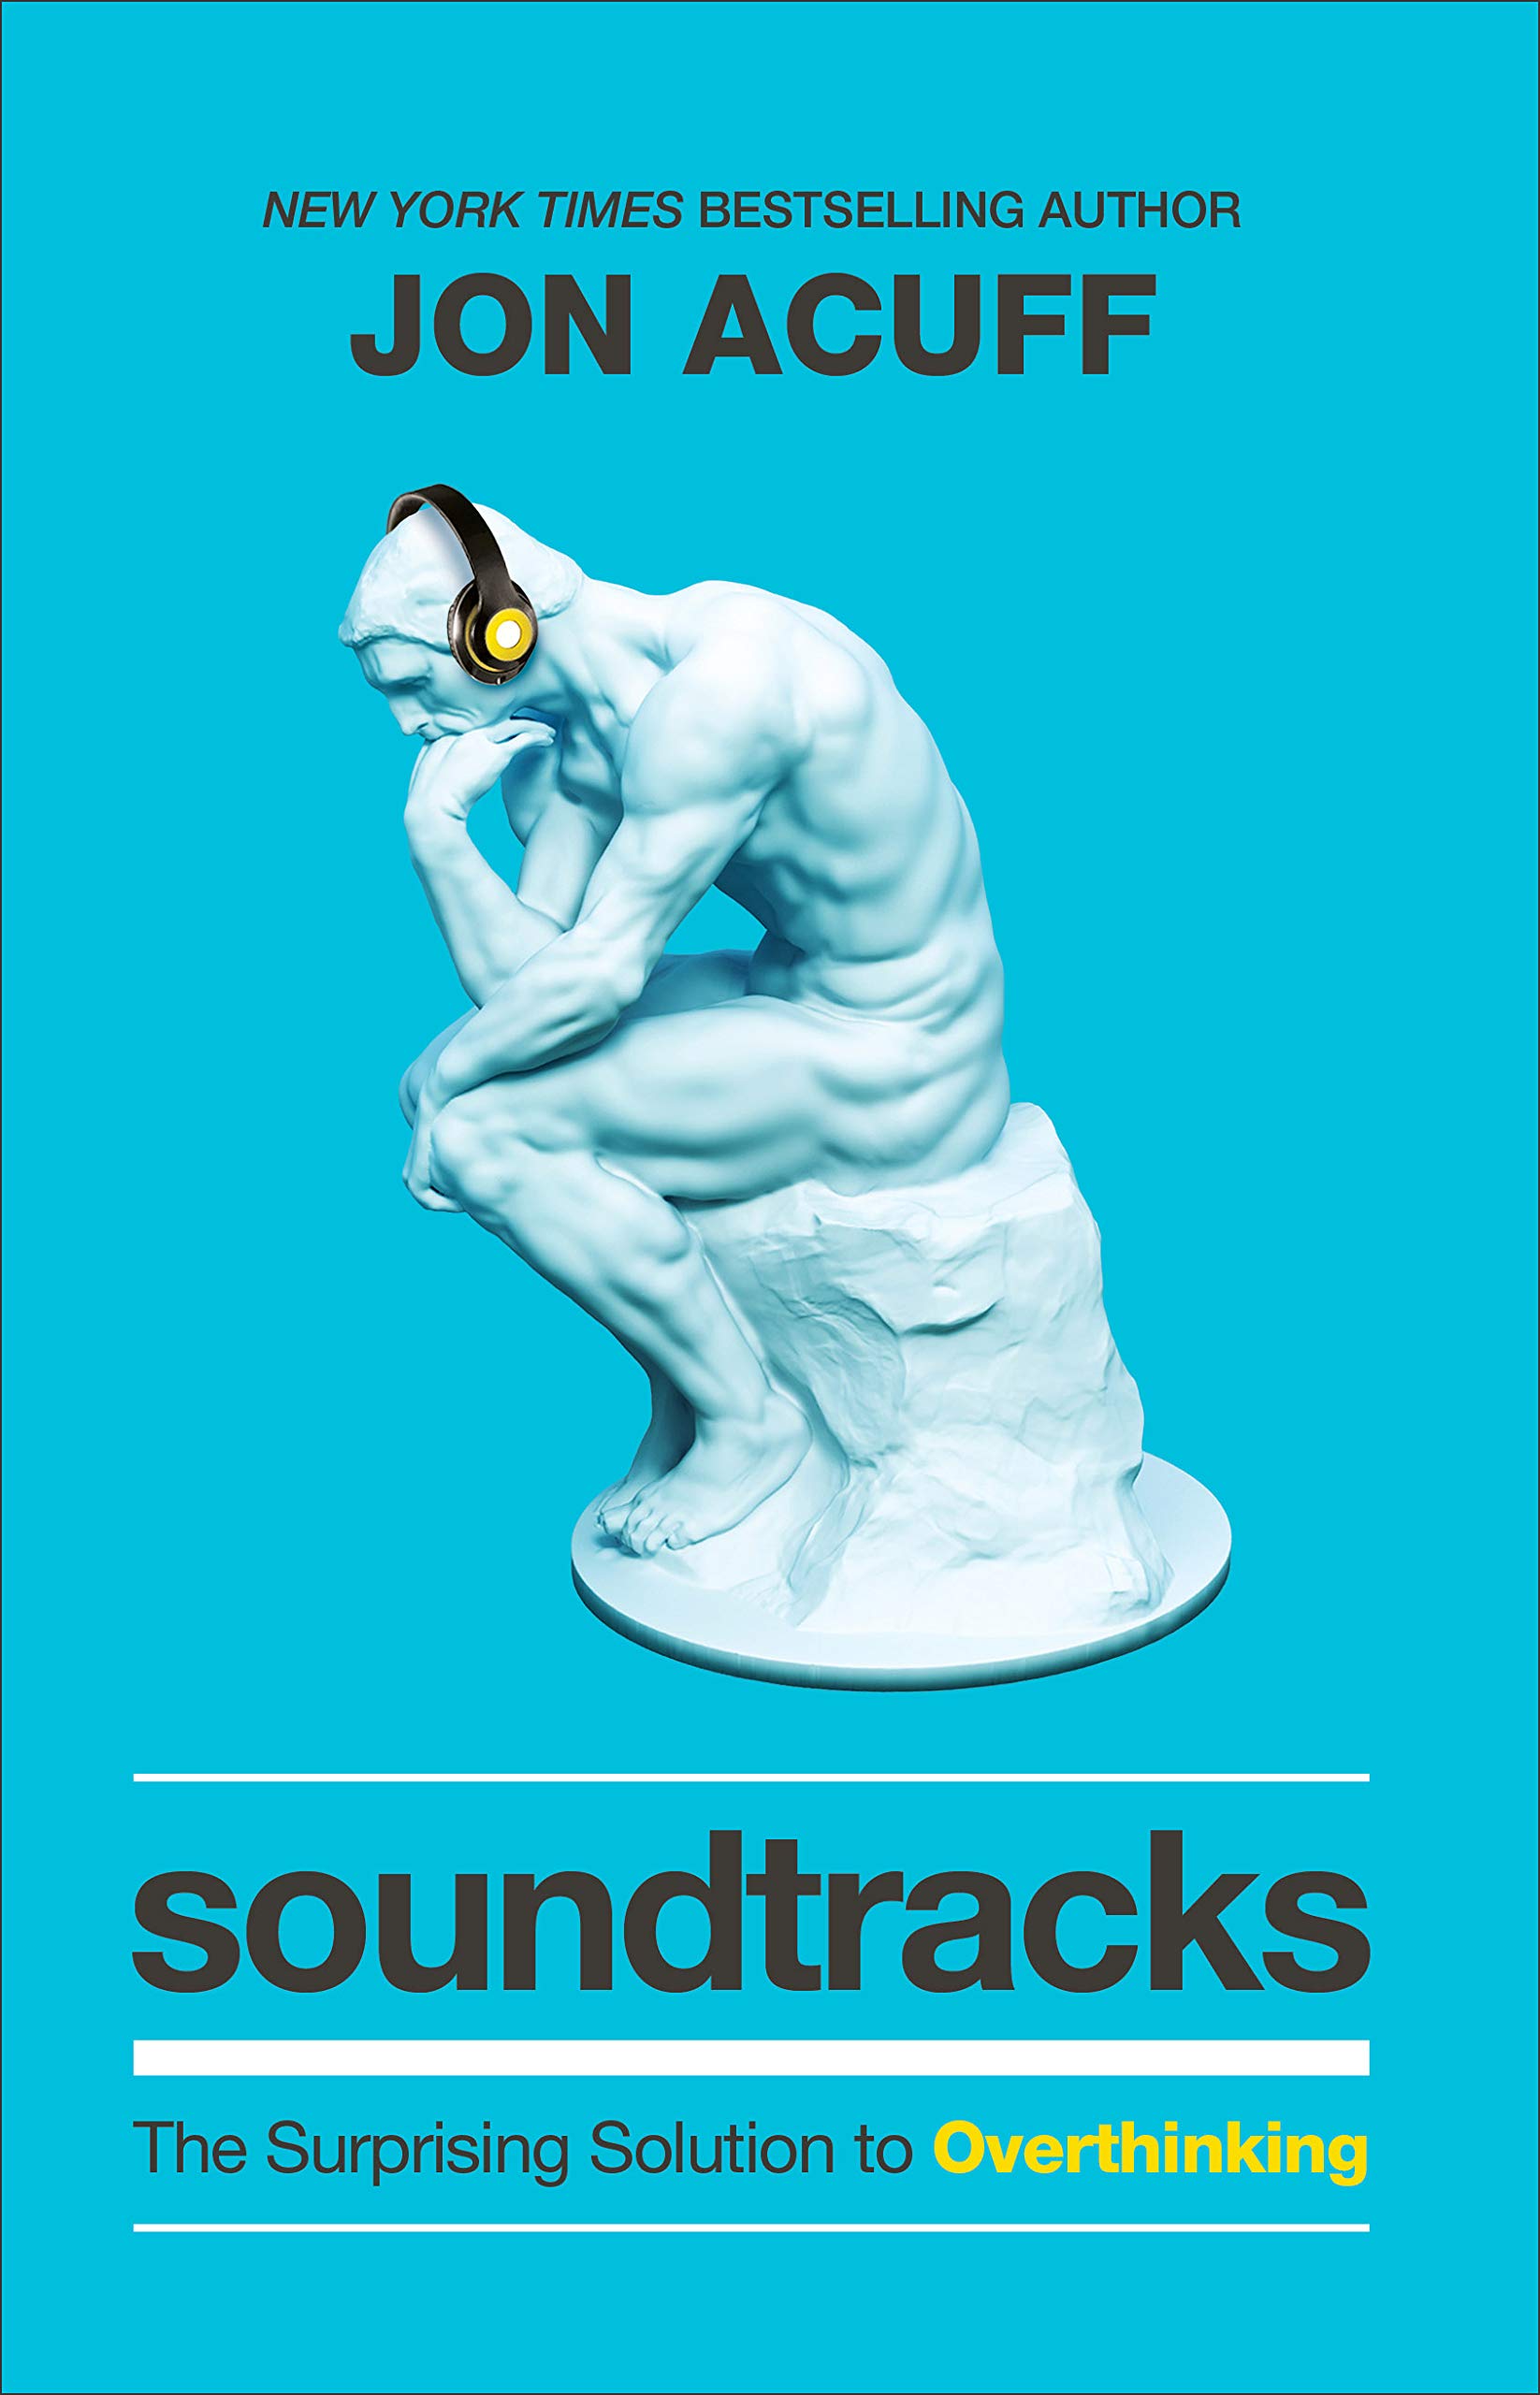 Book cover of Soundtracks by Jon Acuff